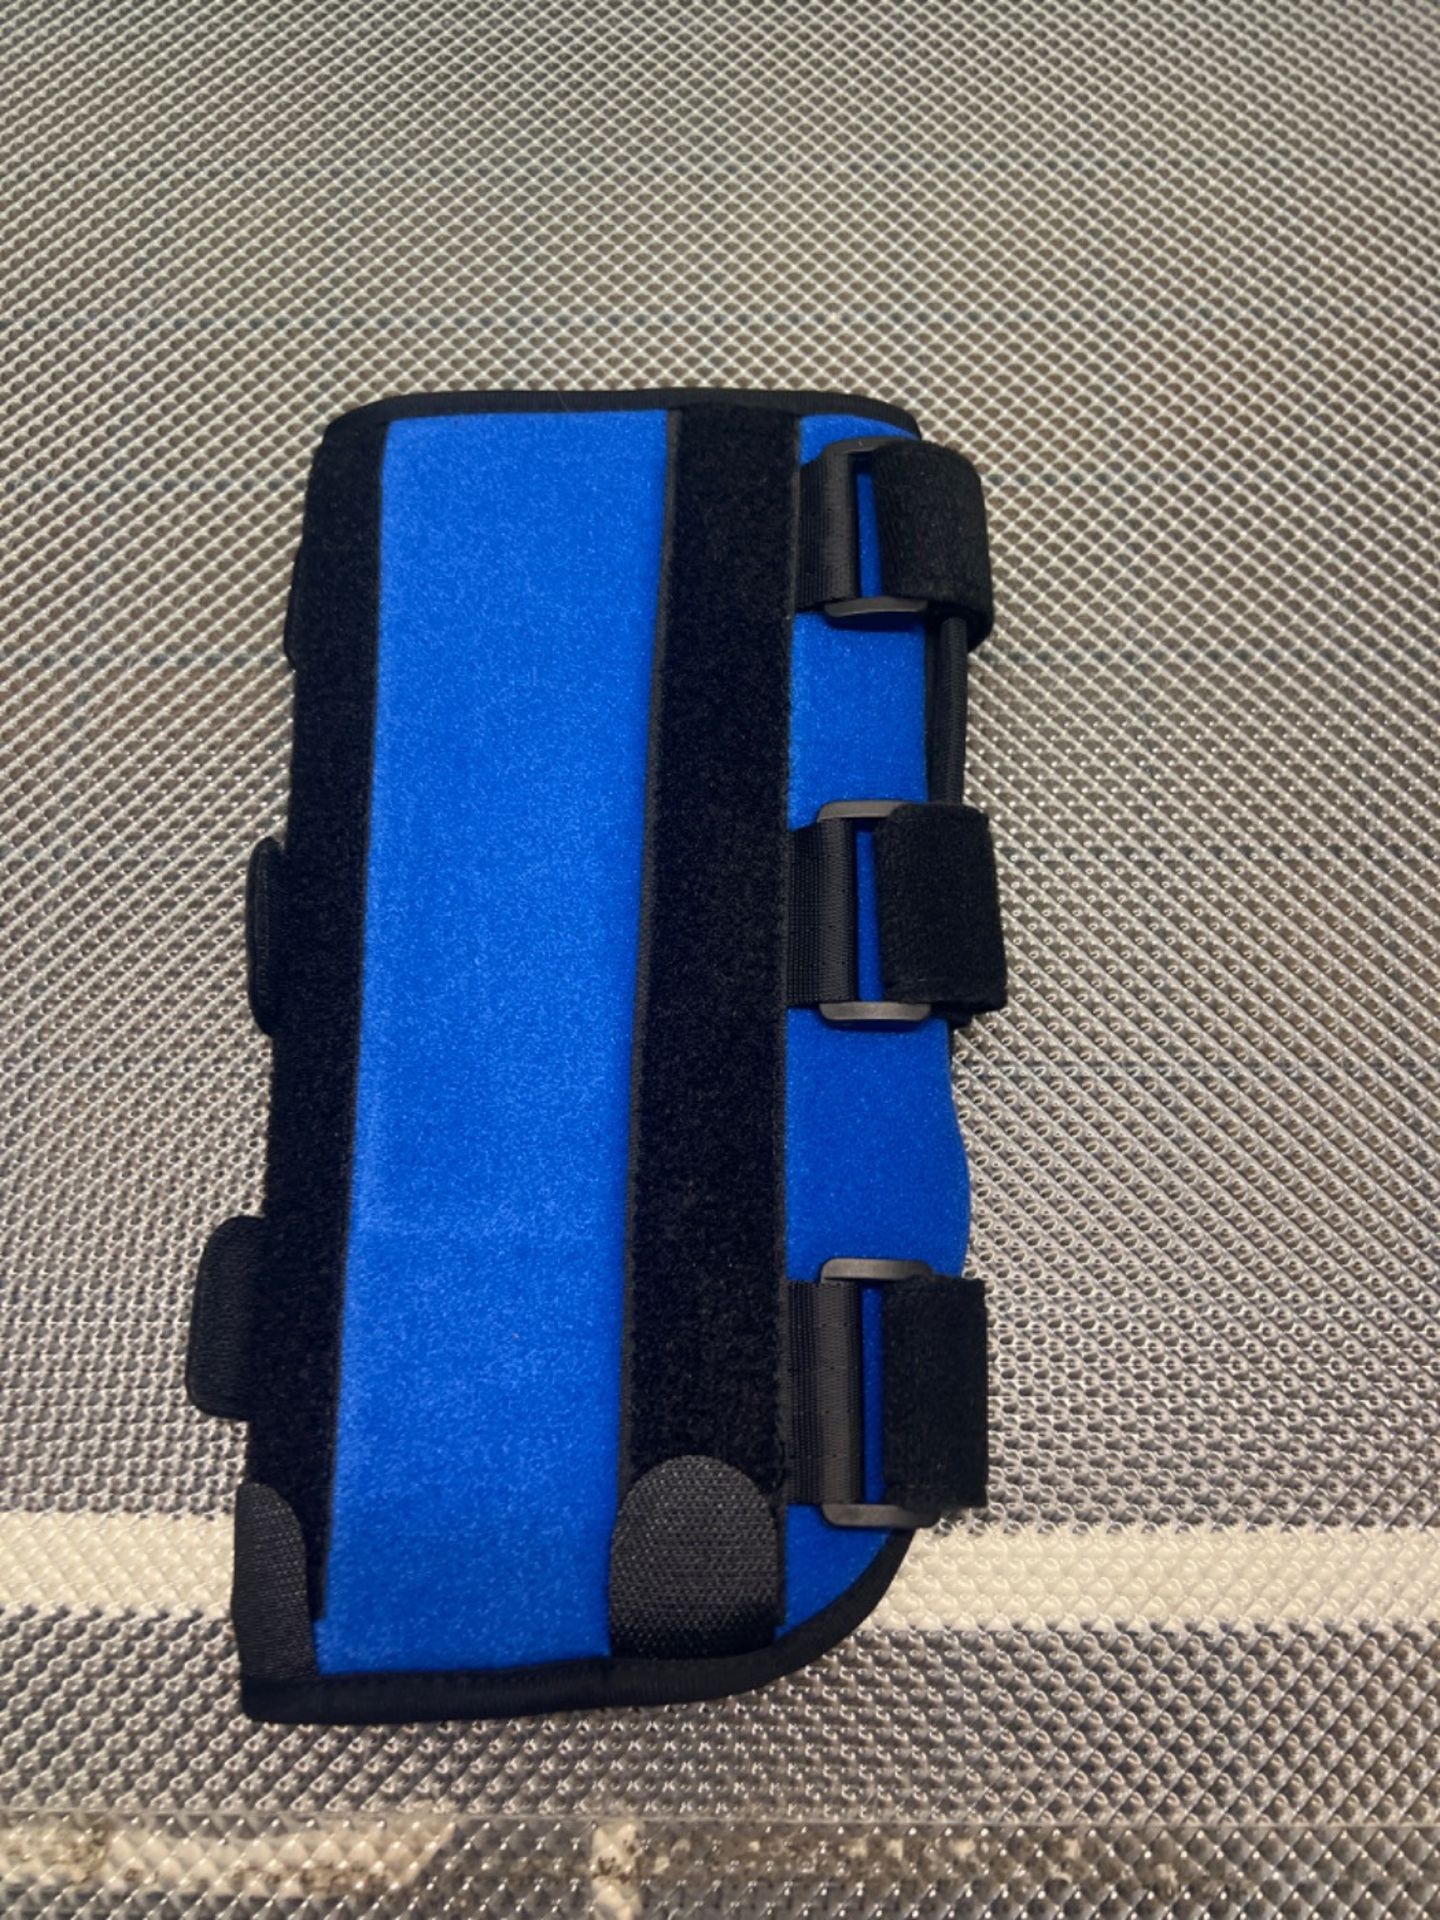 Elbow Brace,Elbow Splint for Cubital Tunnel Syndrome,Night Elbow Sleep Support with 3 Plastic Strip